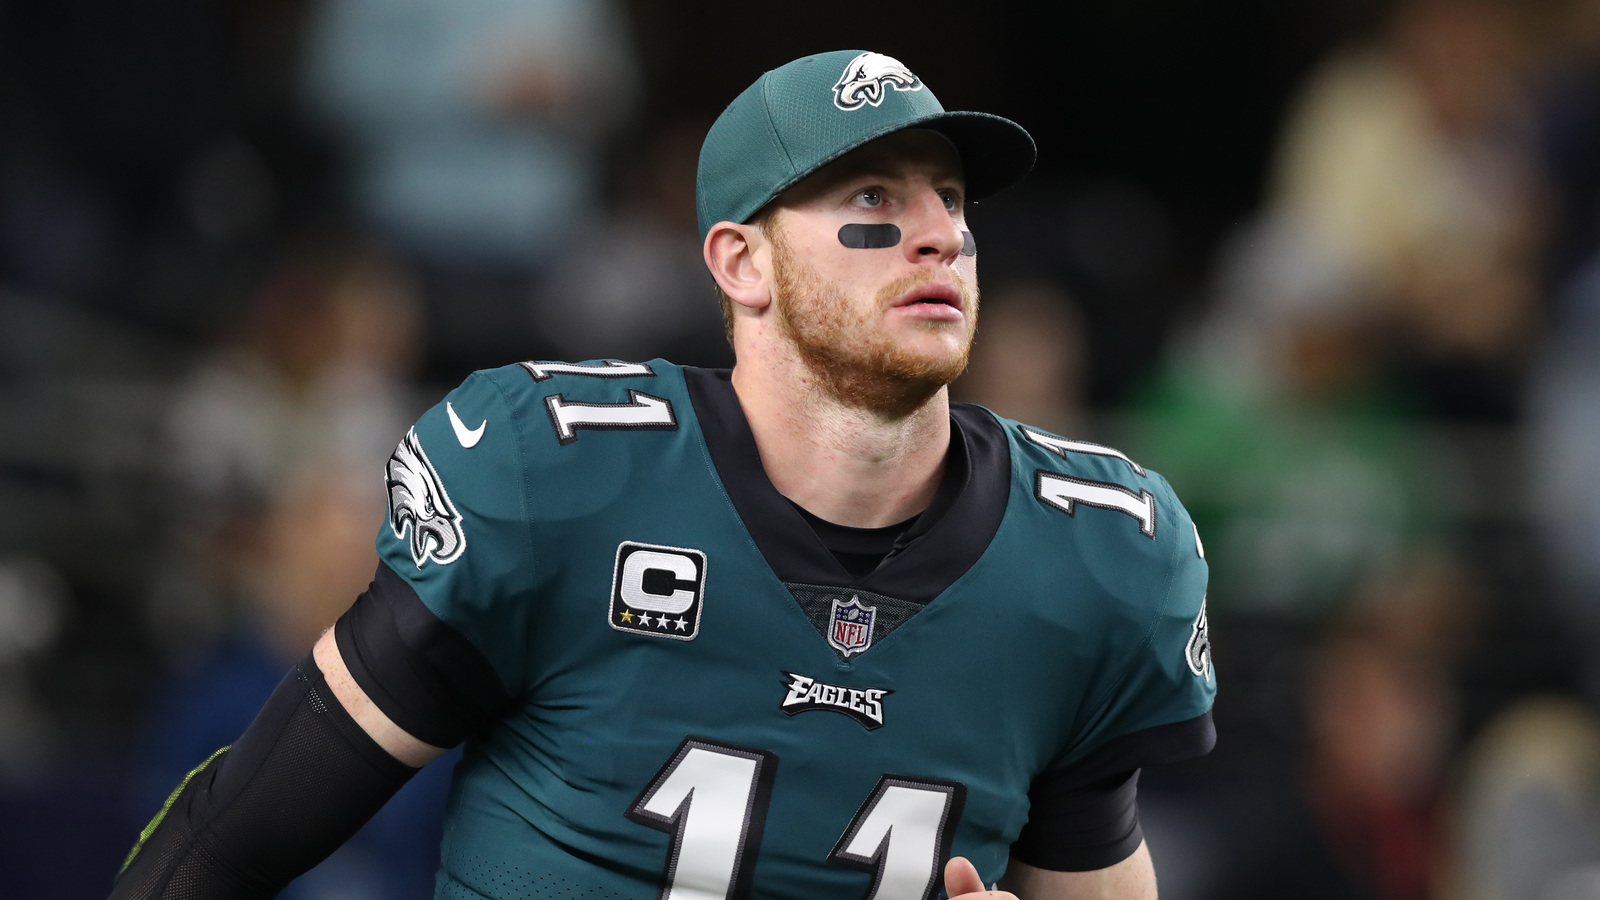 Doctors Told Carson Wentz He Will Be Ready For